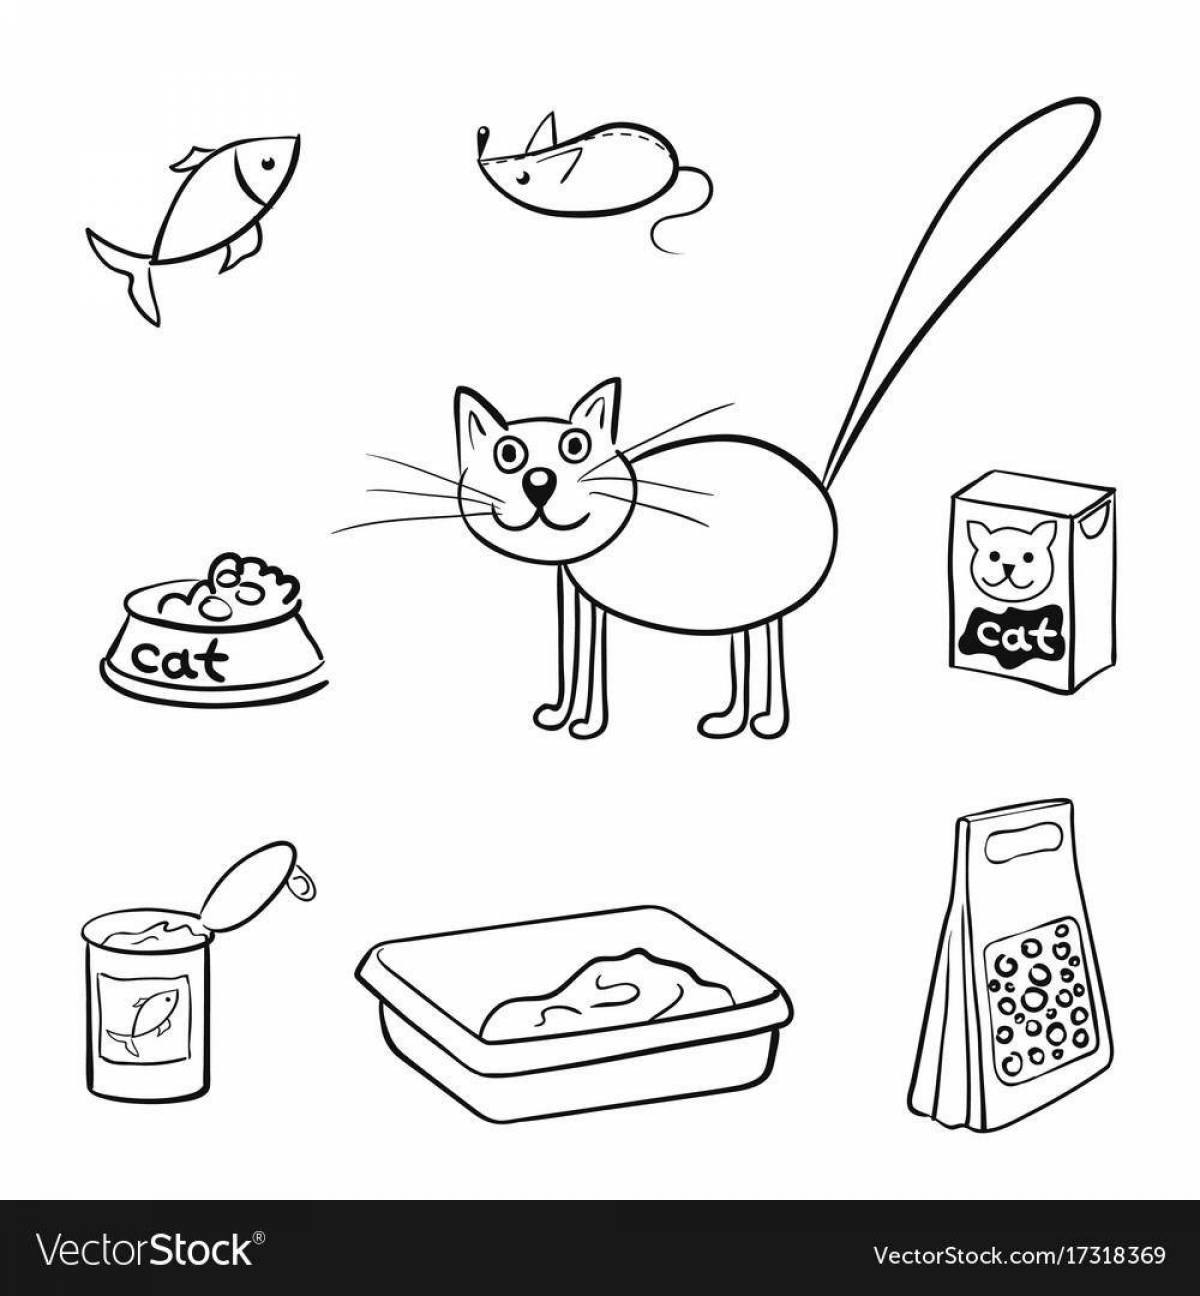 Colorful cat food coloring page